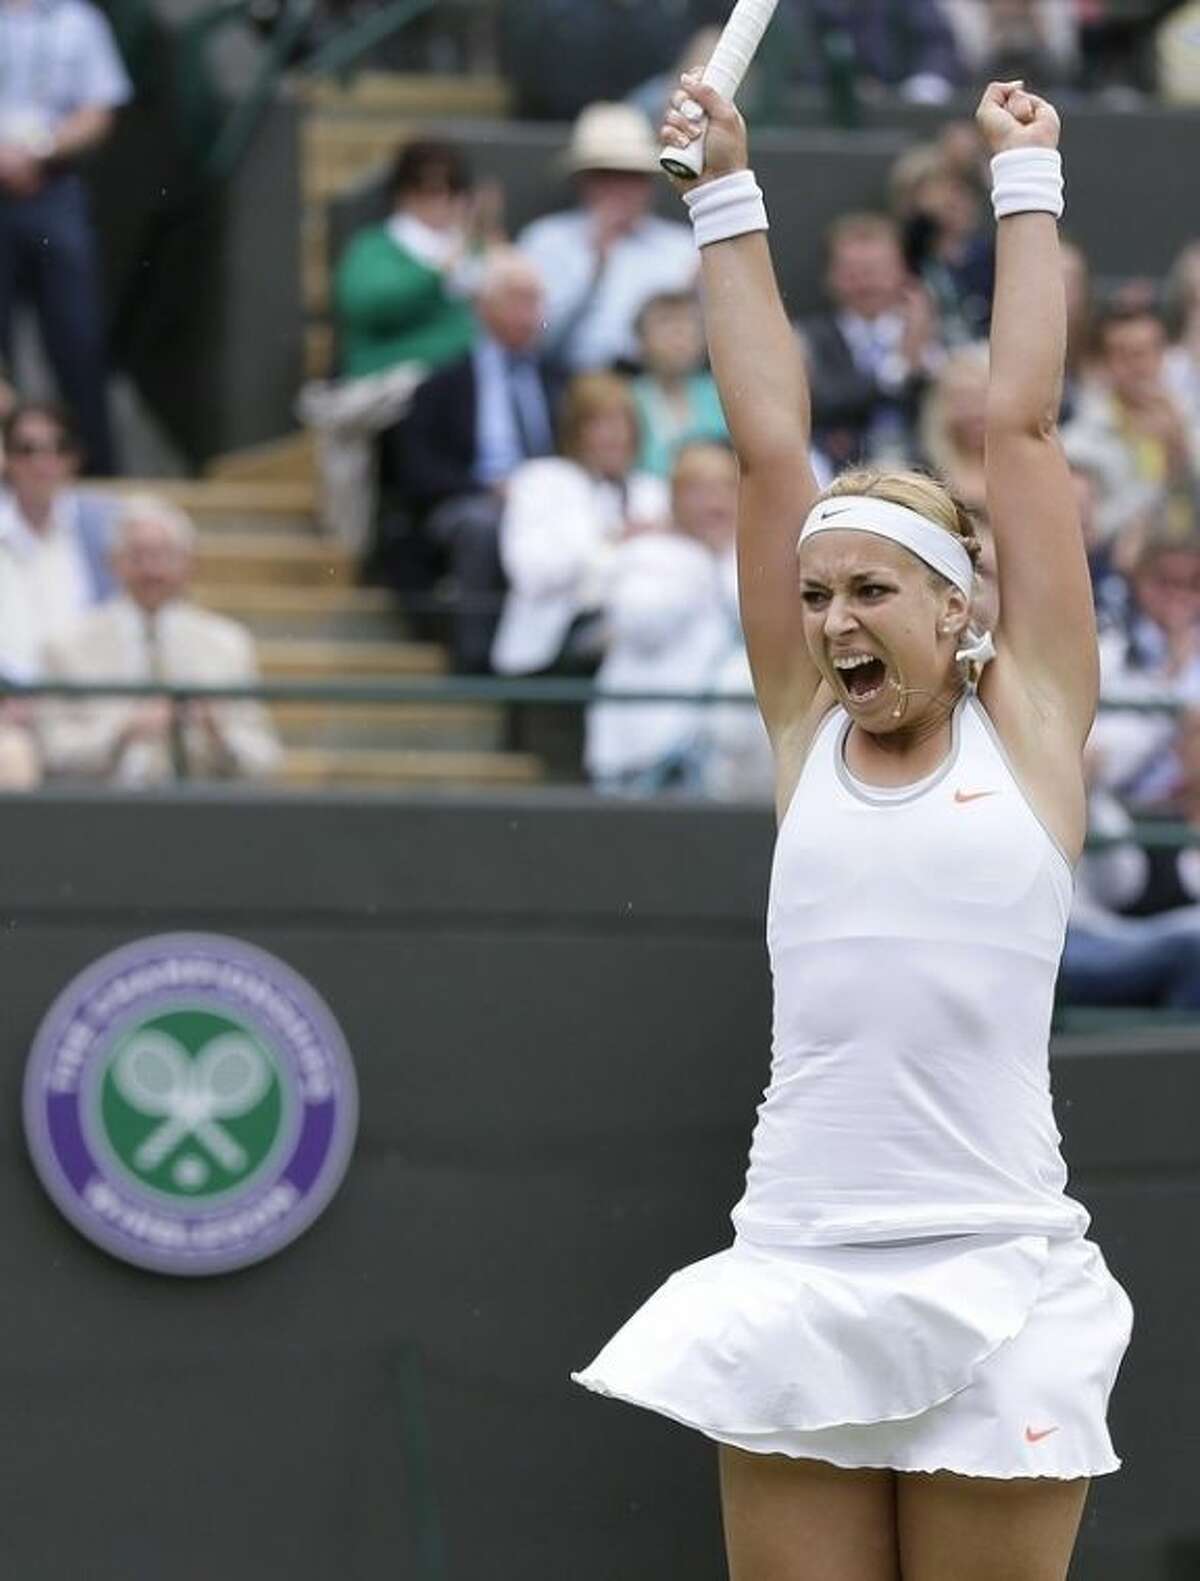 Sabine Lisicki of Germany reacts as she wins a Women's singles quarterfinal match against Kaia Kanepi of Estonia at the All England Lawn Tennis Championships in Wimbledon, London, Tuesday, July 2, 2013. (AP Photo/Alastair Grant)